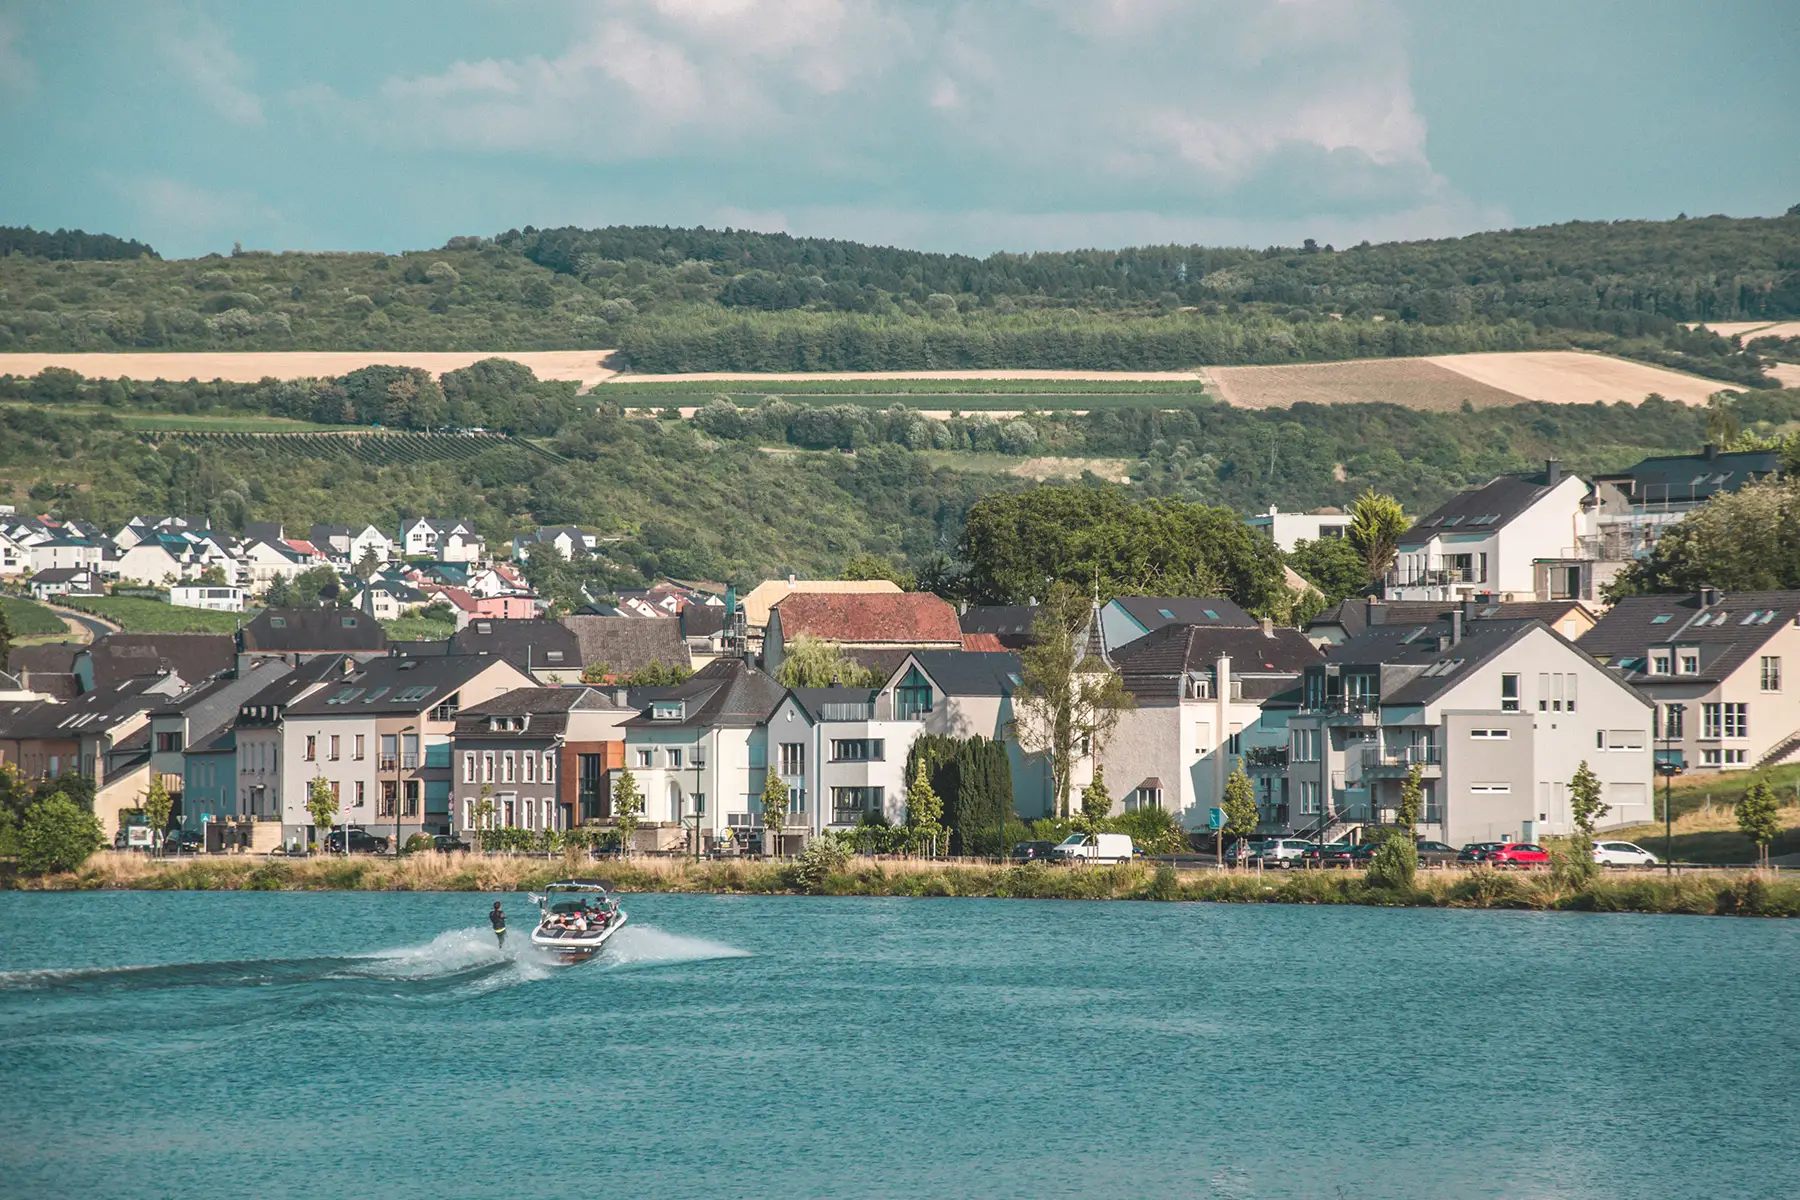 Houses on the waterfront of a lake, people in a speedboat in front